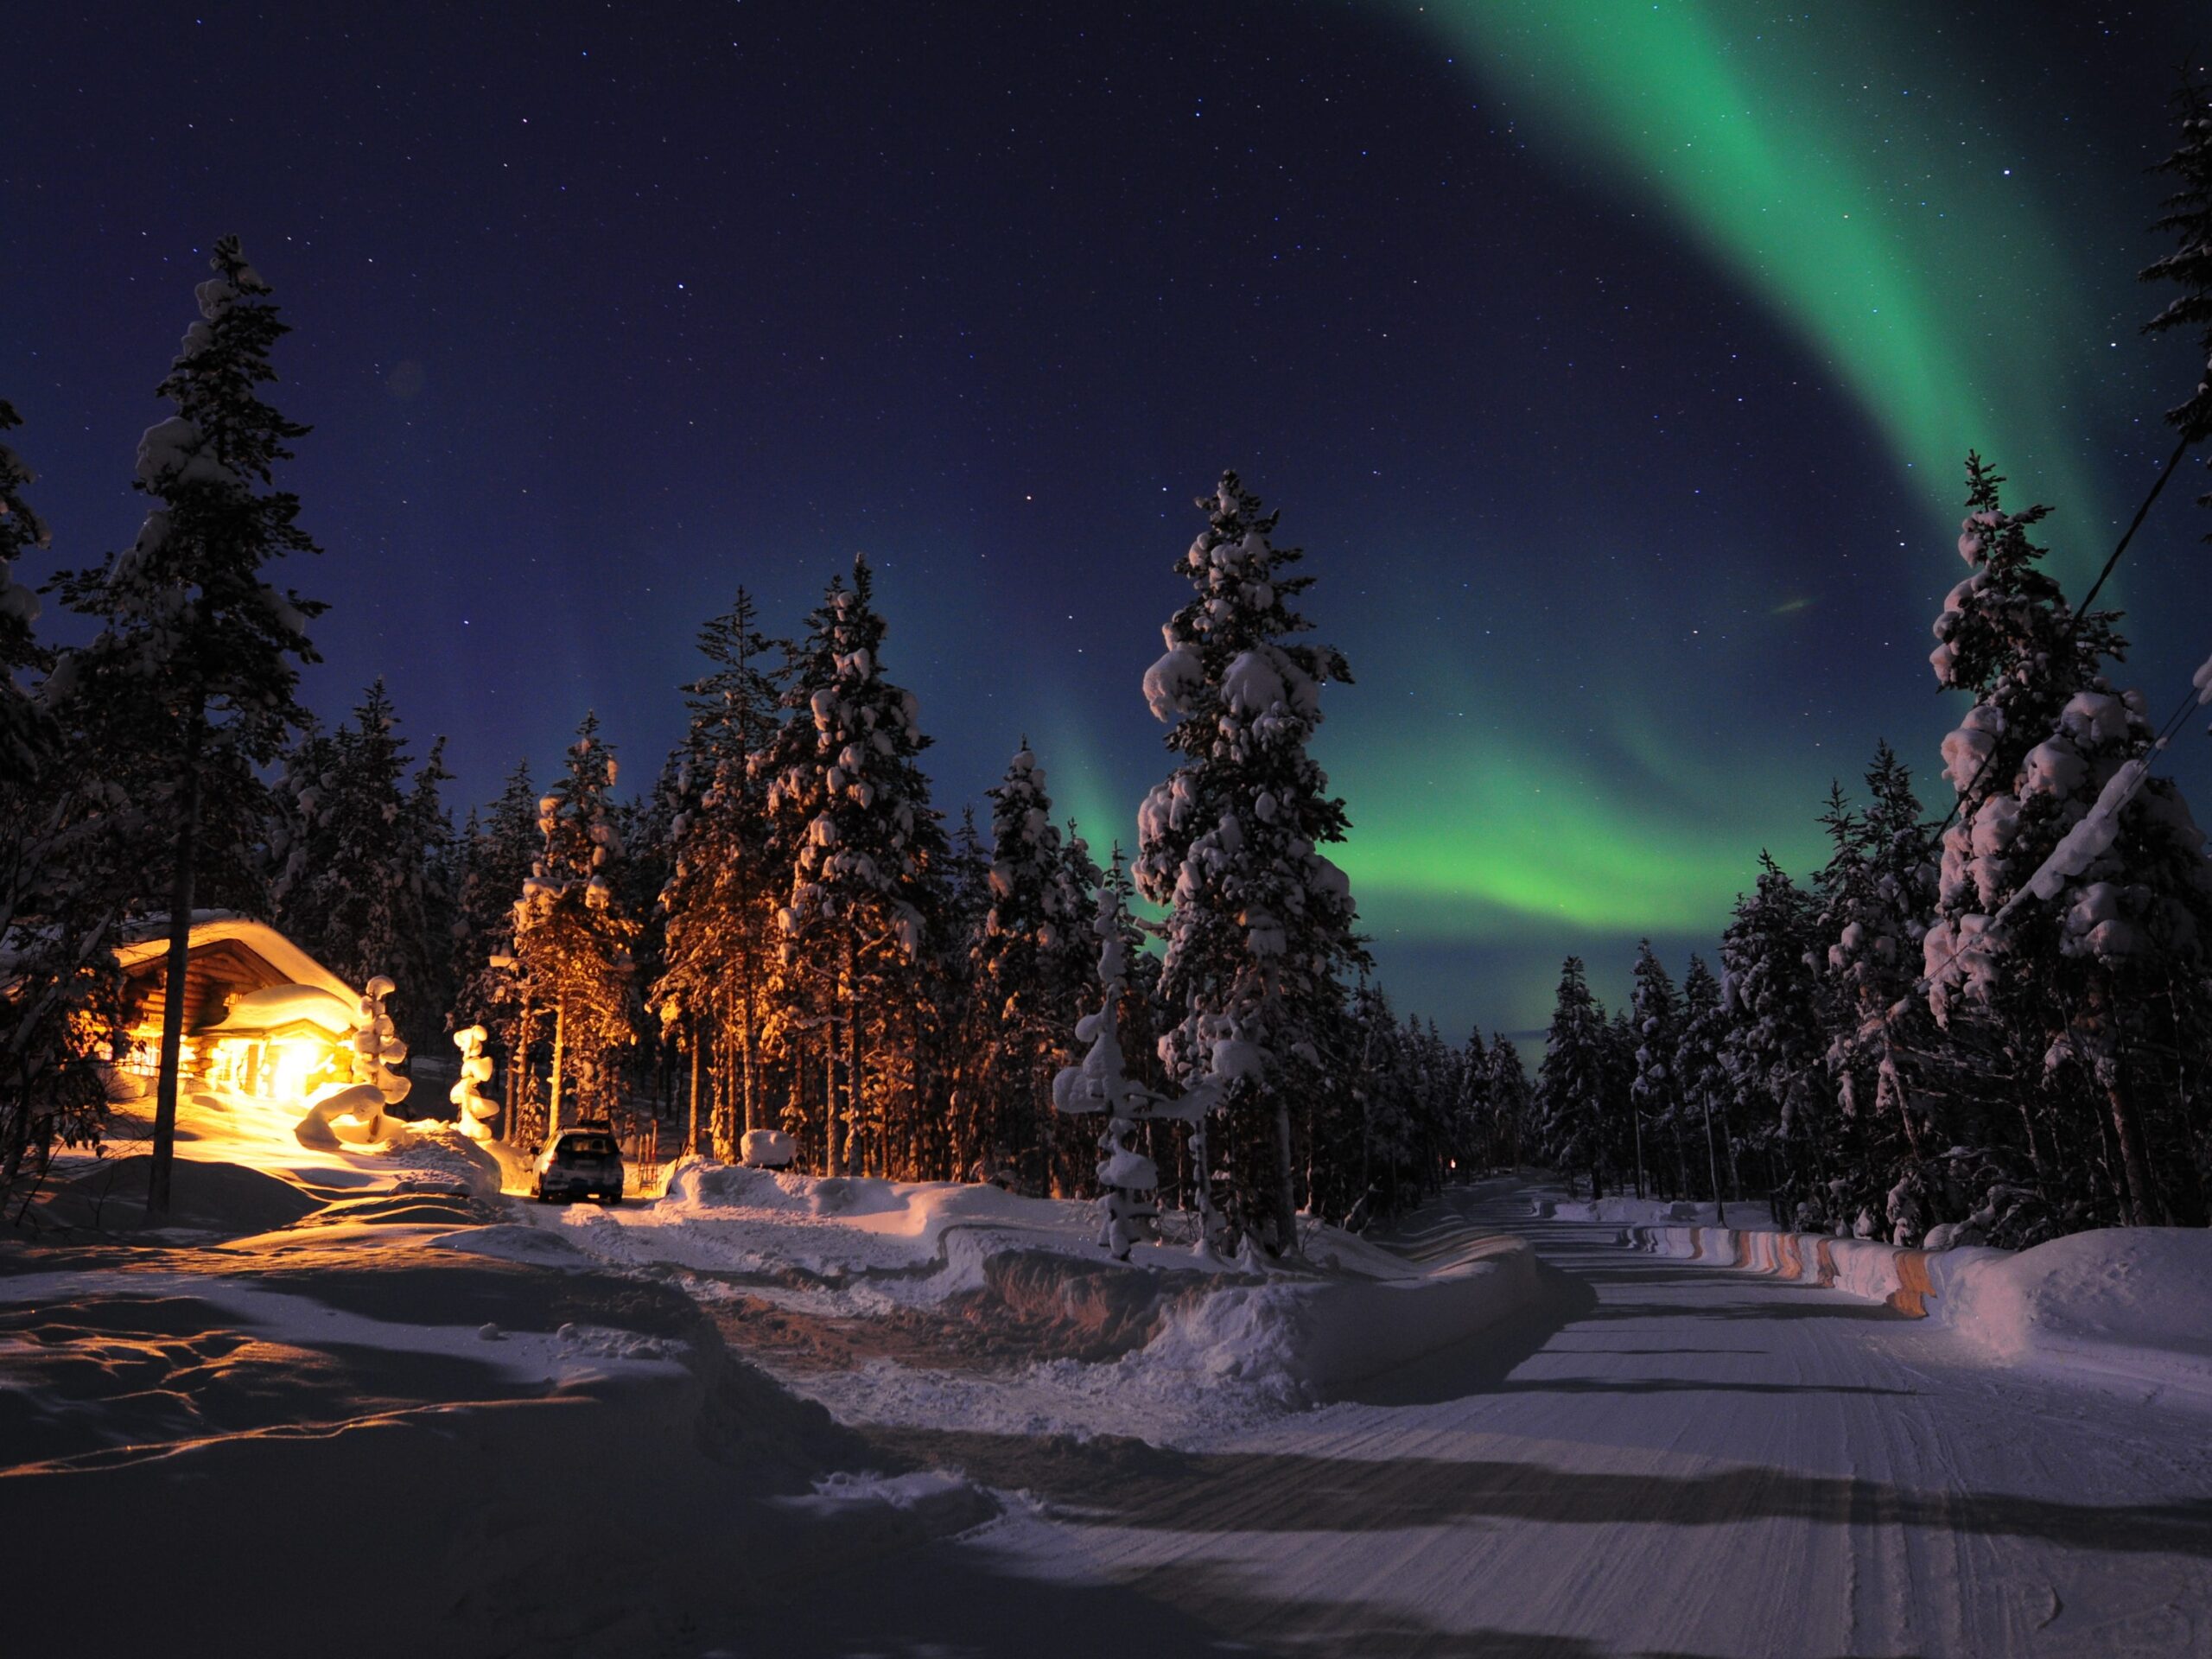 northern lights in the sky over a snow-covered forest in lapland finland